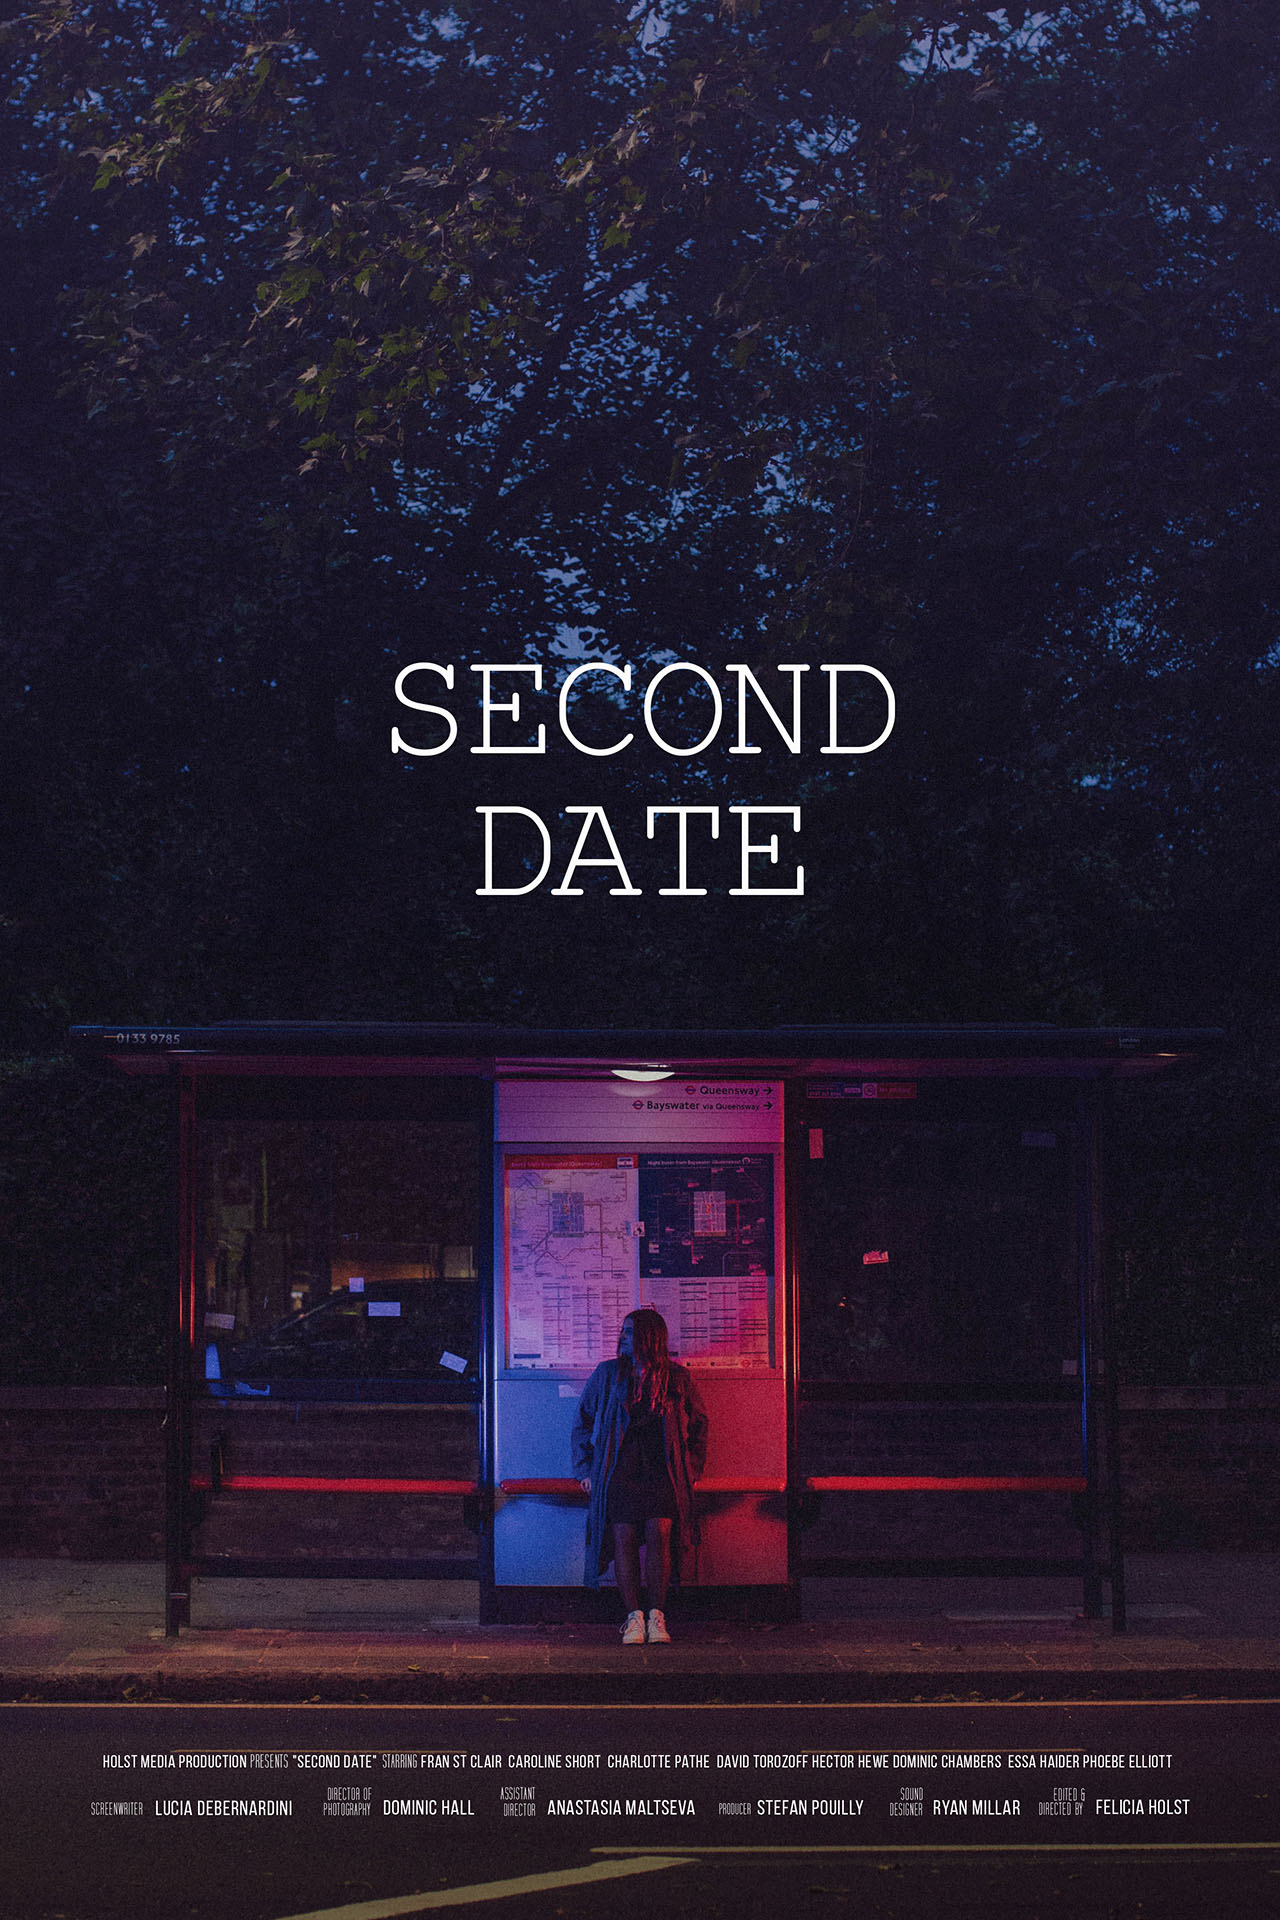 Image of a film poster for the short film Second Date